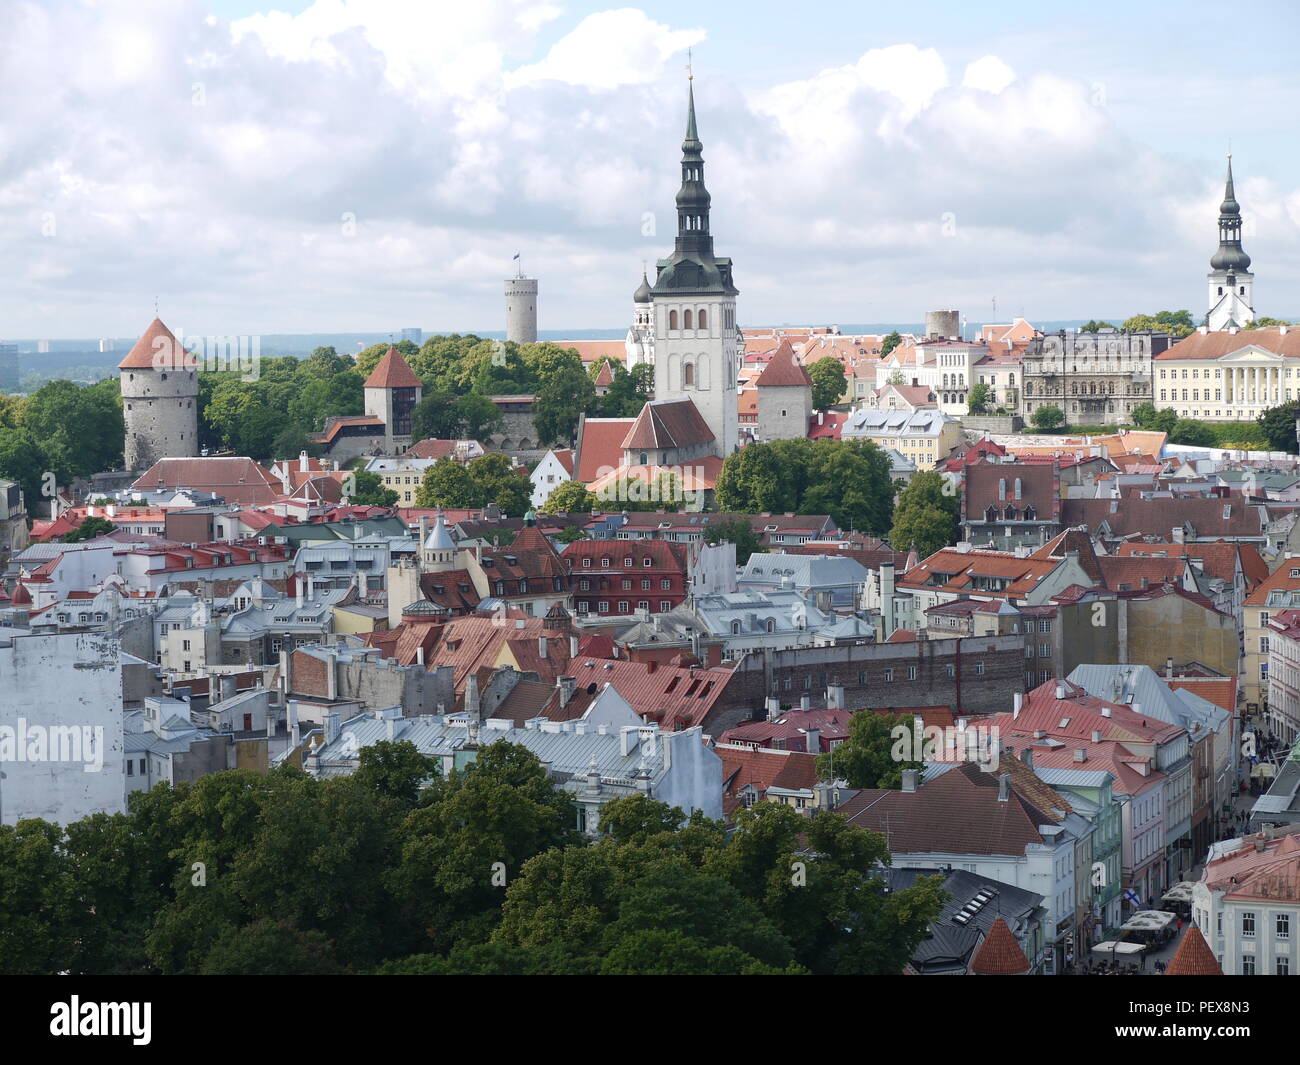 Tallinn old town during summer time from above Stock Photo